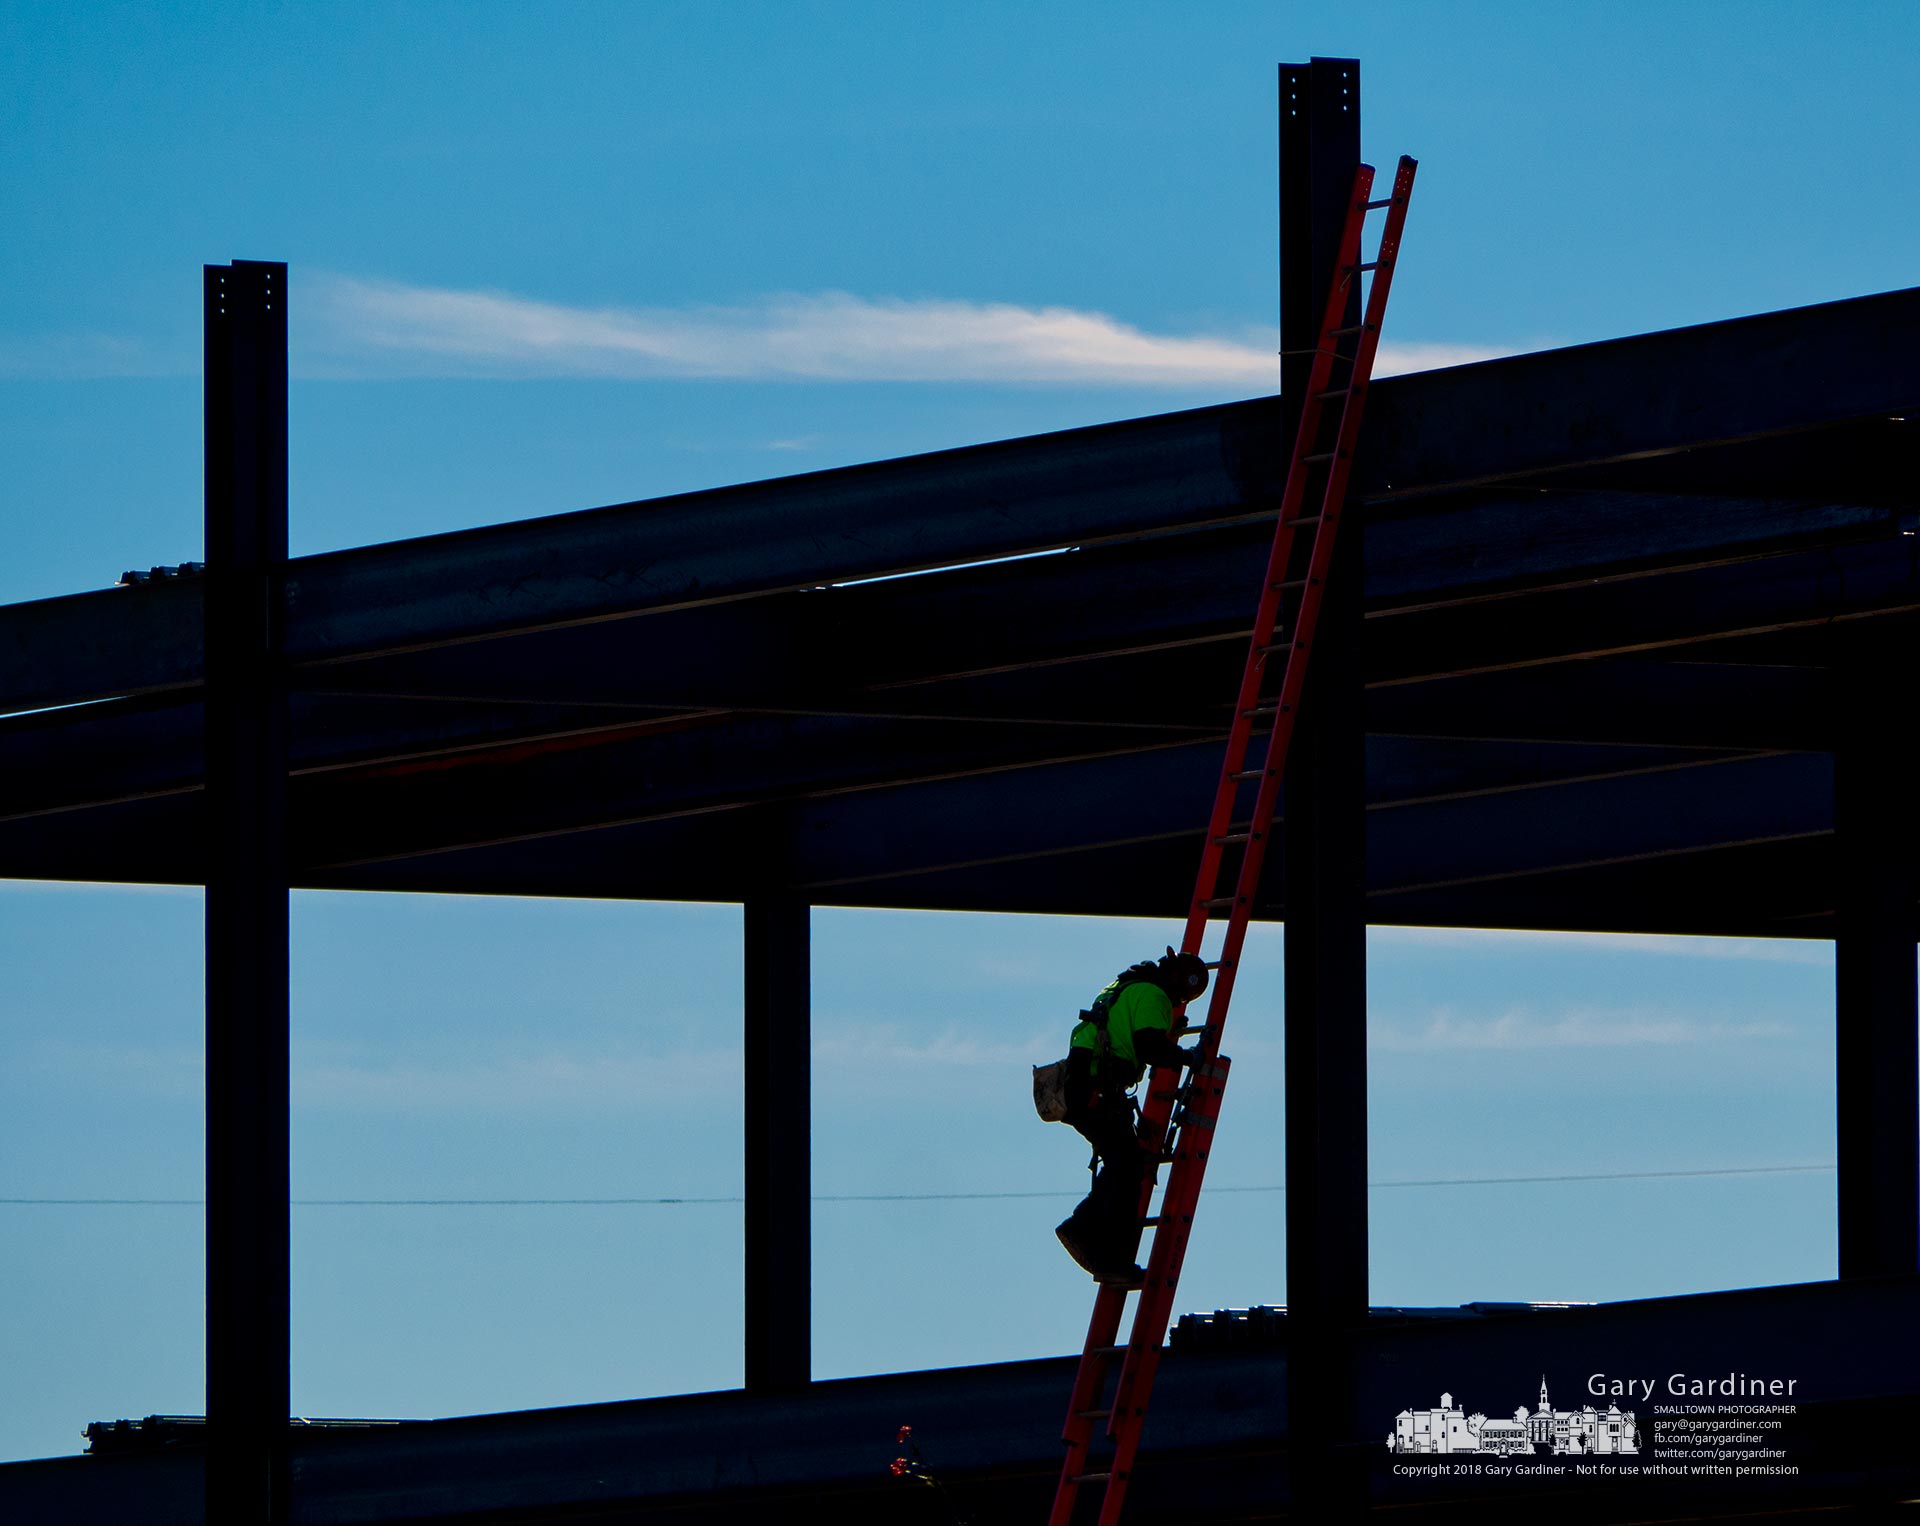 A steelworker descends a two-story ladder at the end of his workday building the superstructure for the new DHL headquarters building in Westerville. My Final Photo for Oct. 24, 2018.